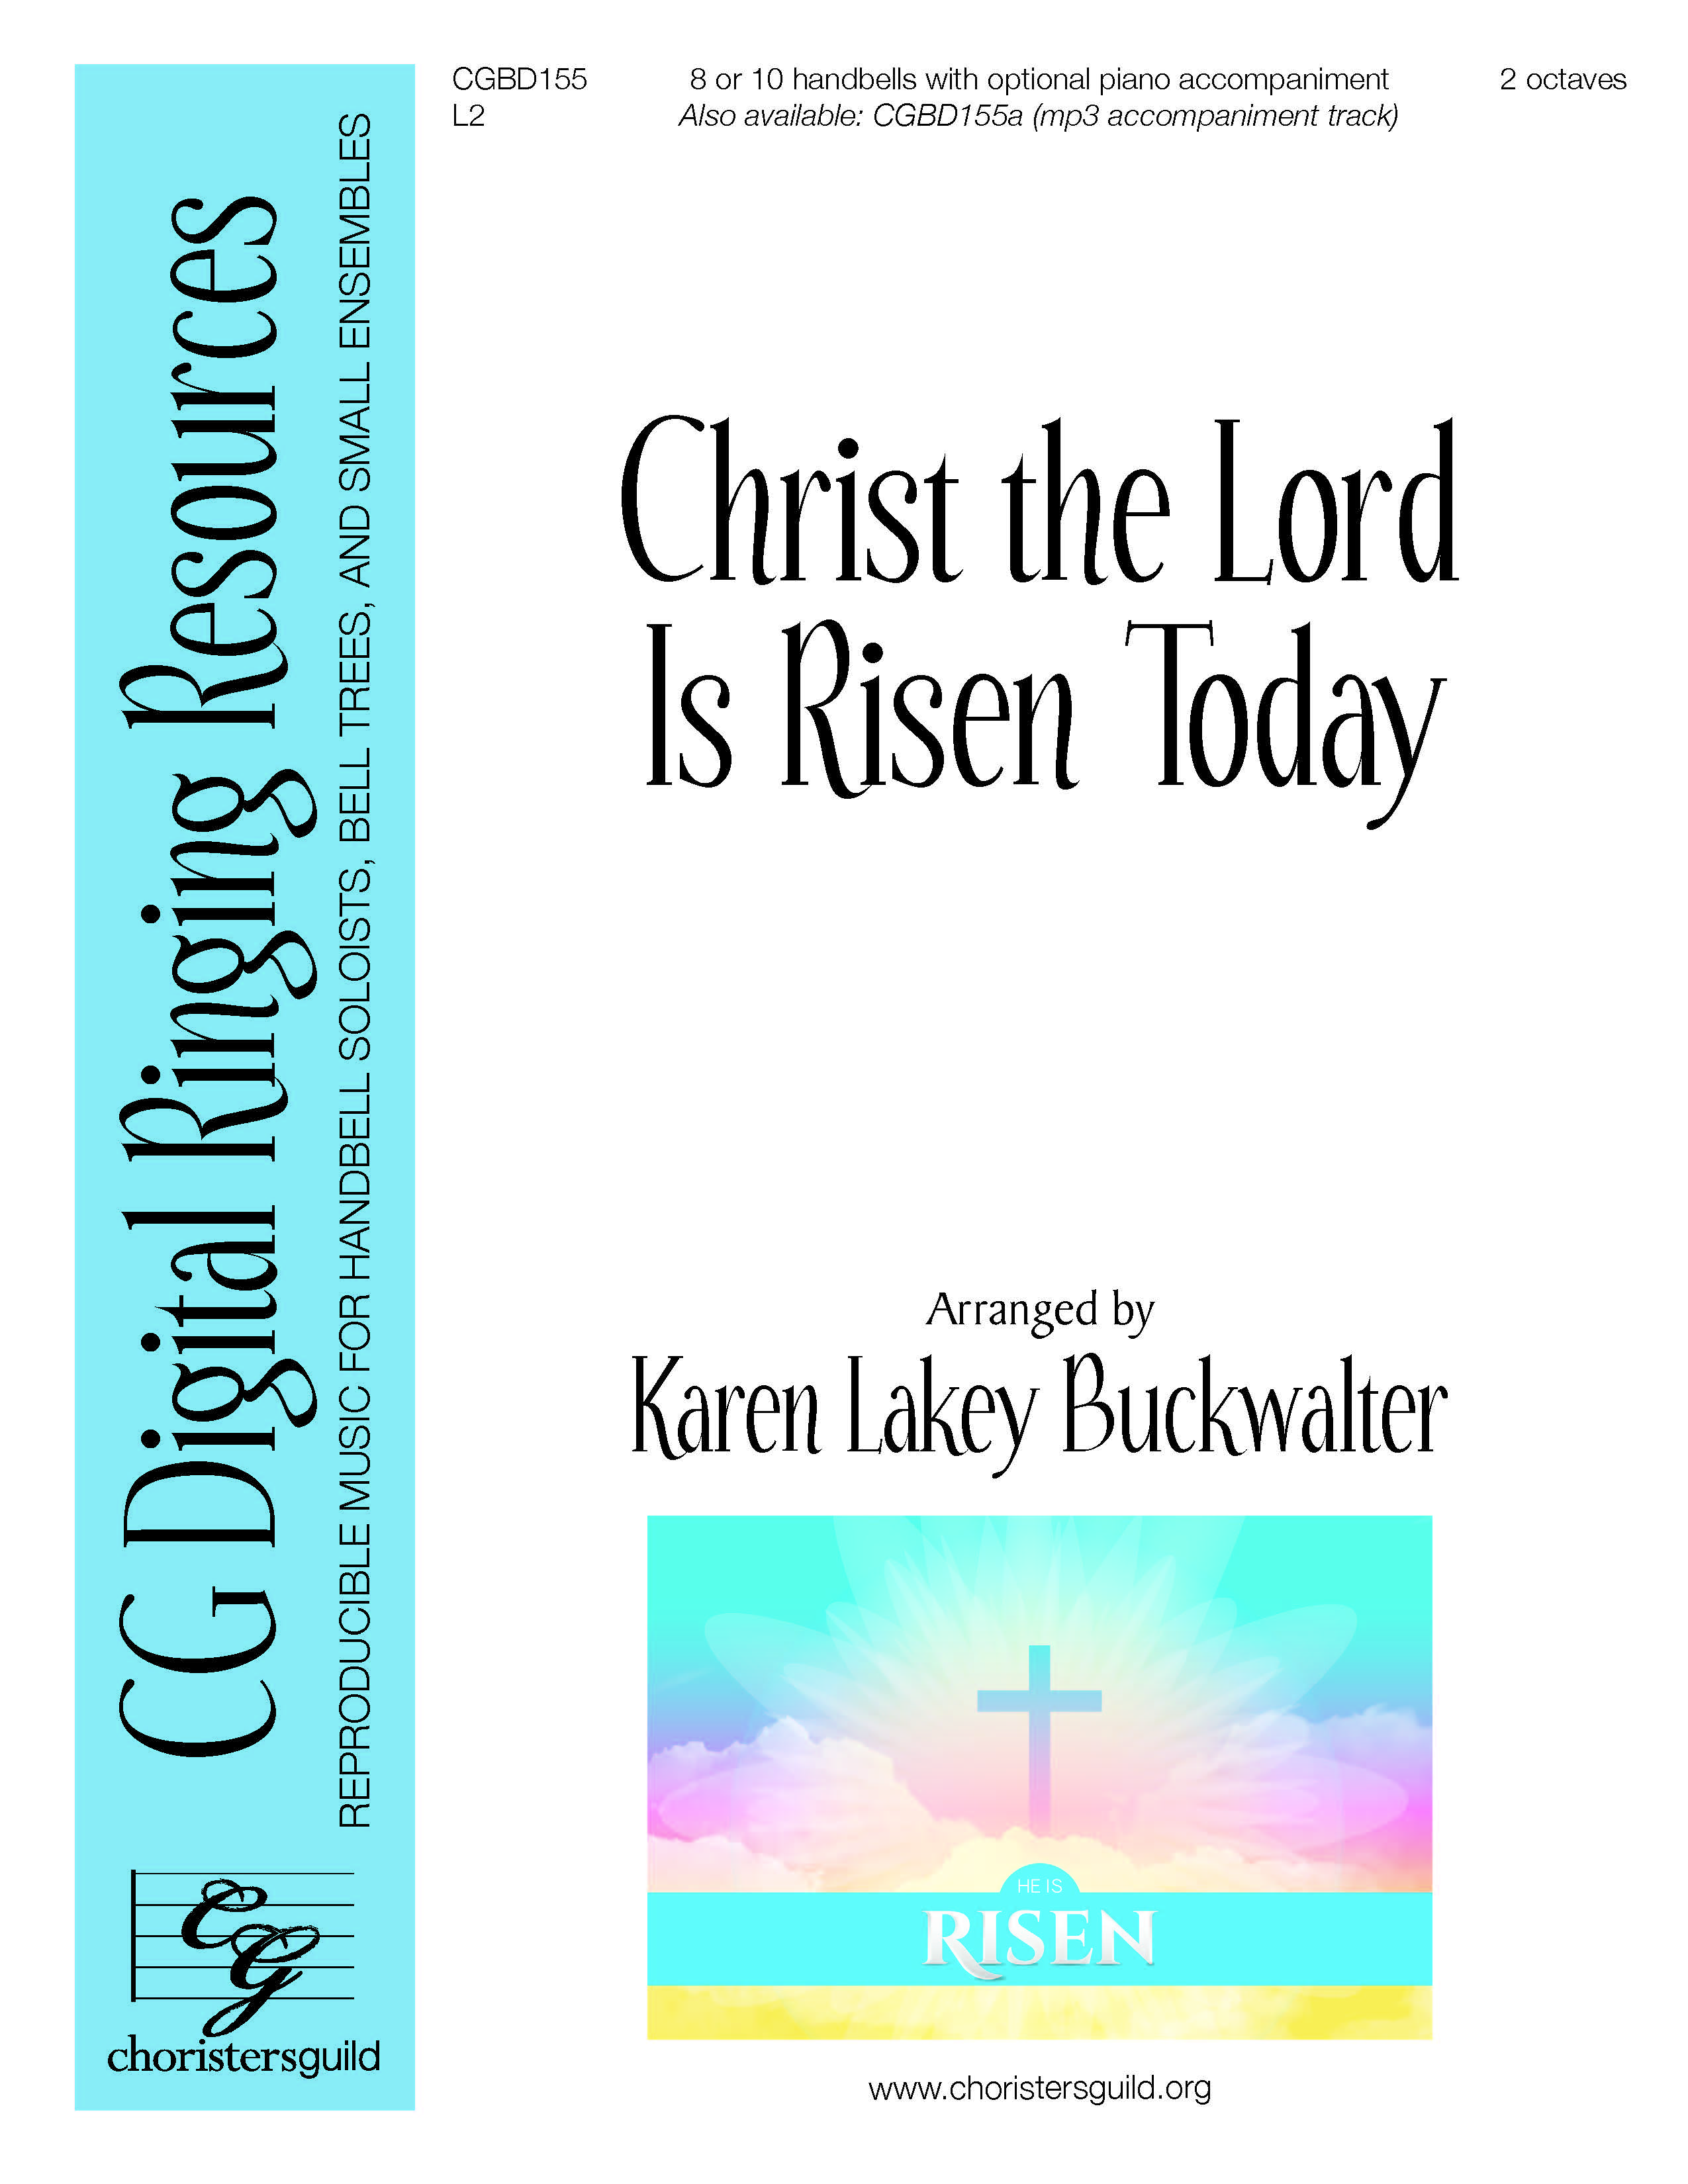 Christ the Lord is Risen Today - Digital Accompaniment Track